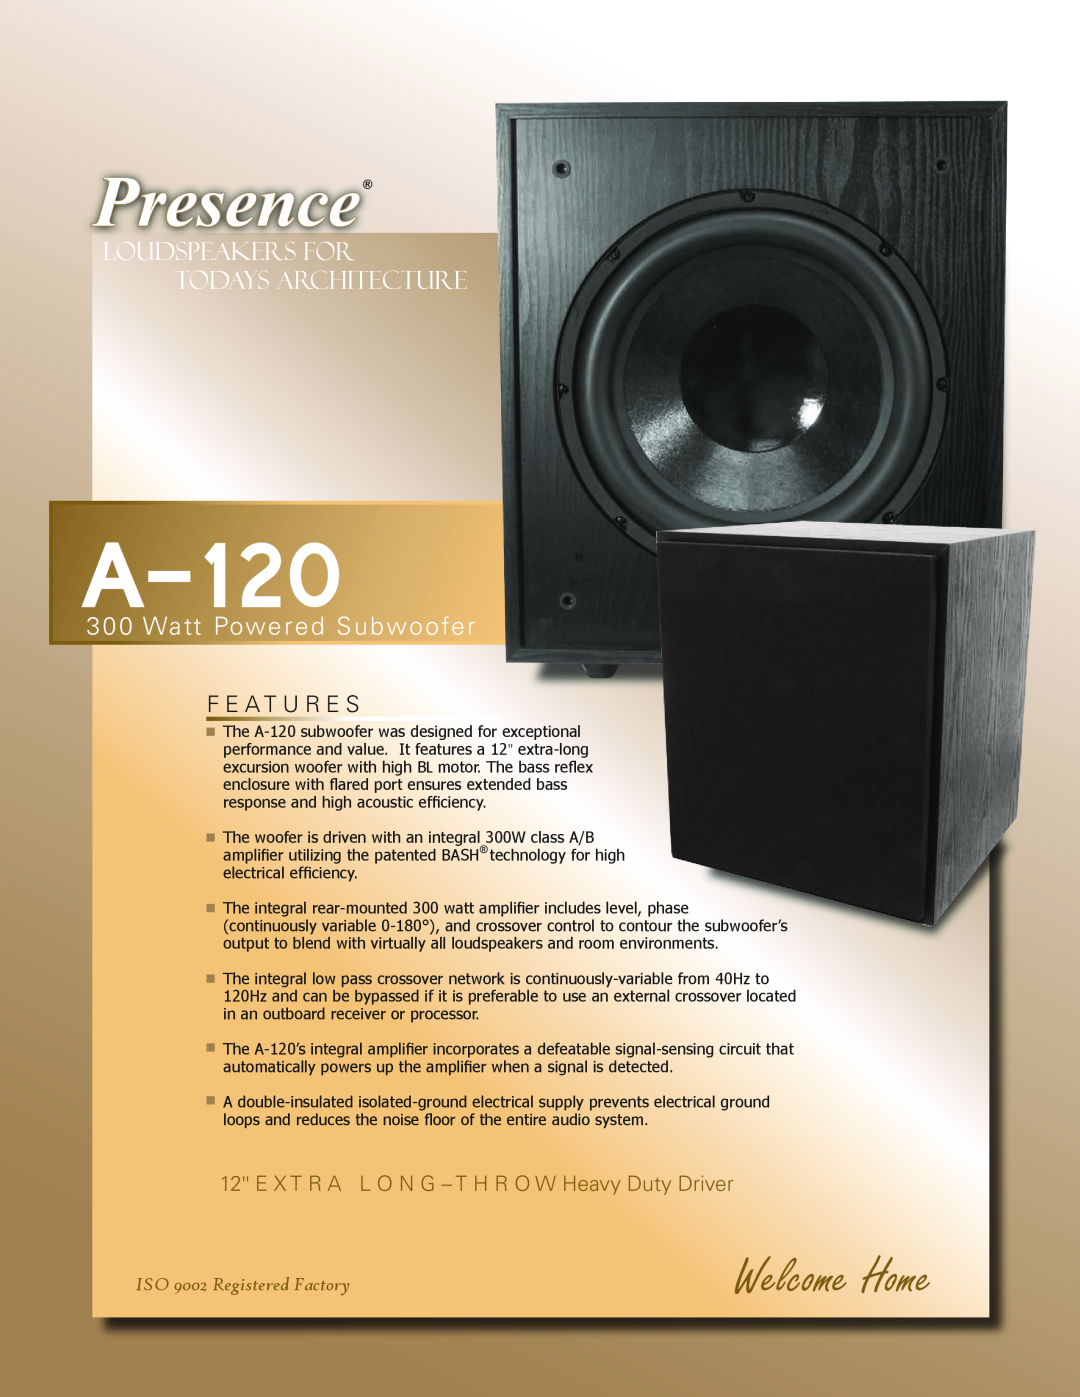 OEM Systems A-120 manual F E A T U R E S, Presence, Welcome Home, Loudspeakers For Todays Architecture, A300 